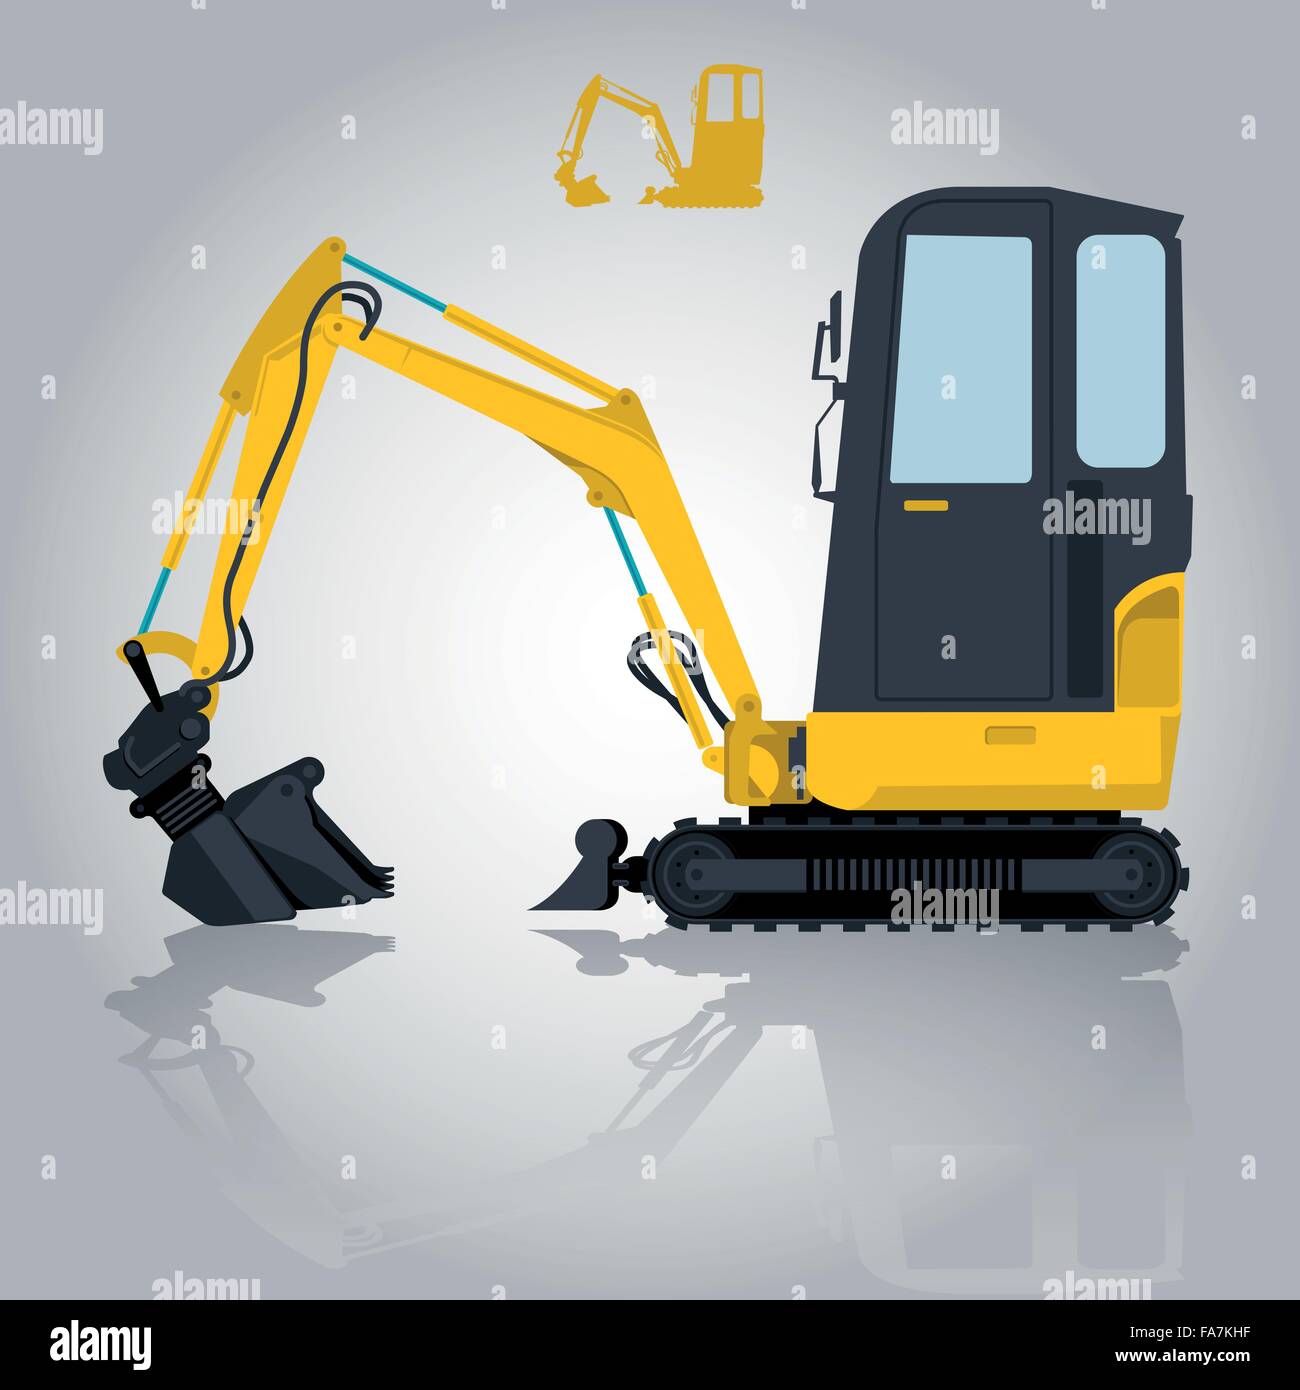 Yellow small digger builds roads, loads building material. Bagger digging of sand coal waste rock and gravel. Illustration Stock Vector